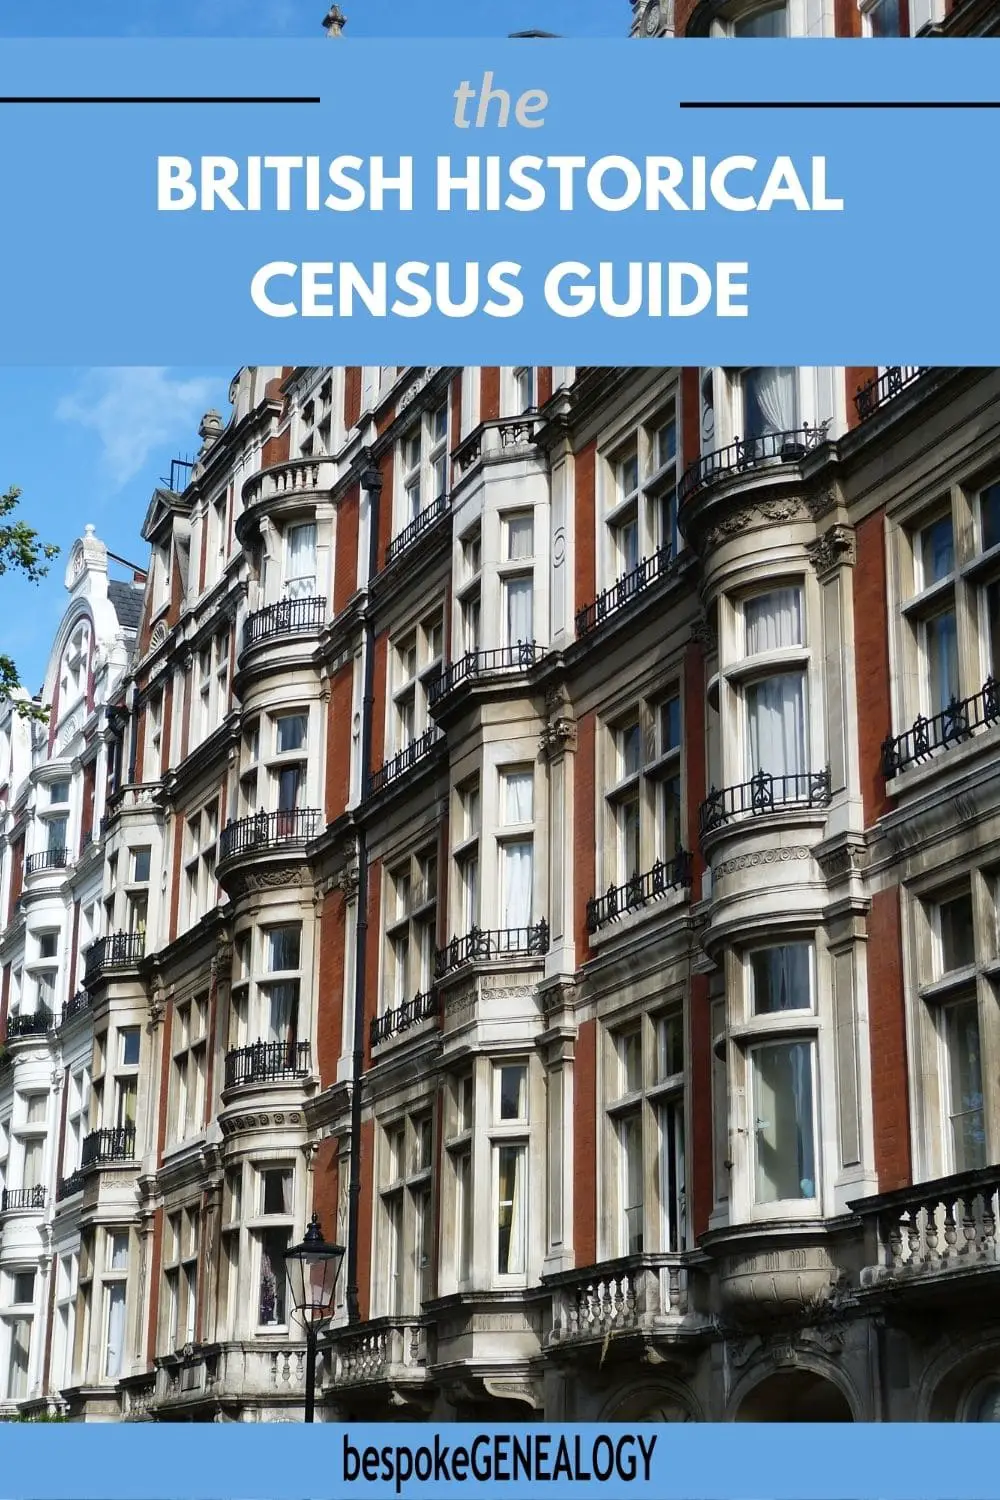 The British Historical census guide. Photo of Victorian town houses.